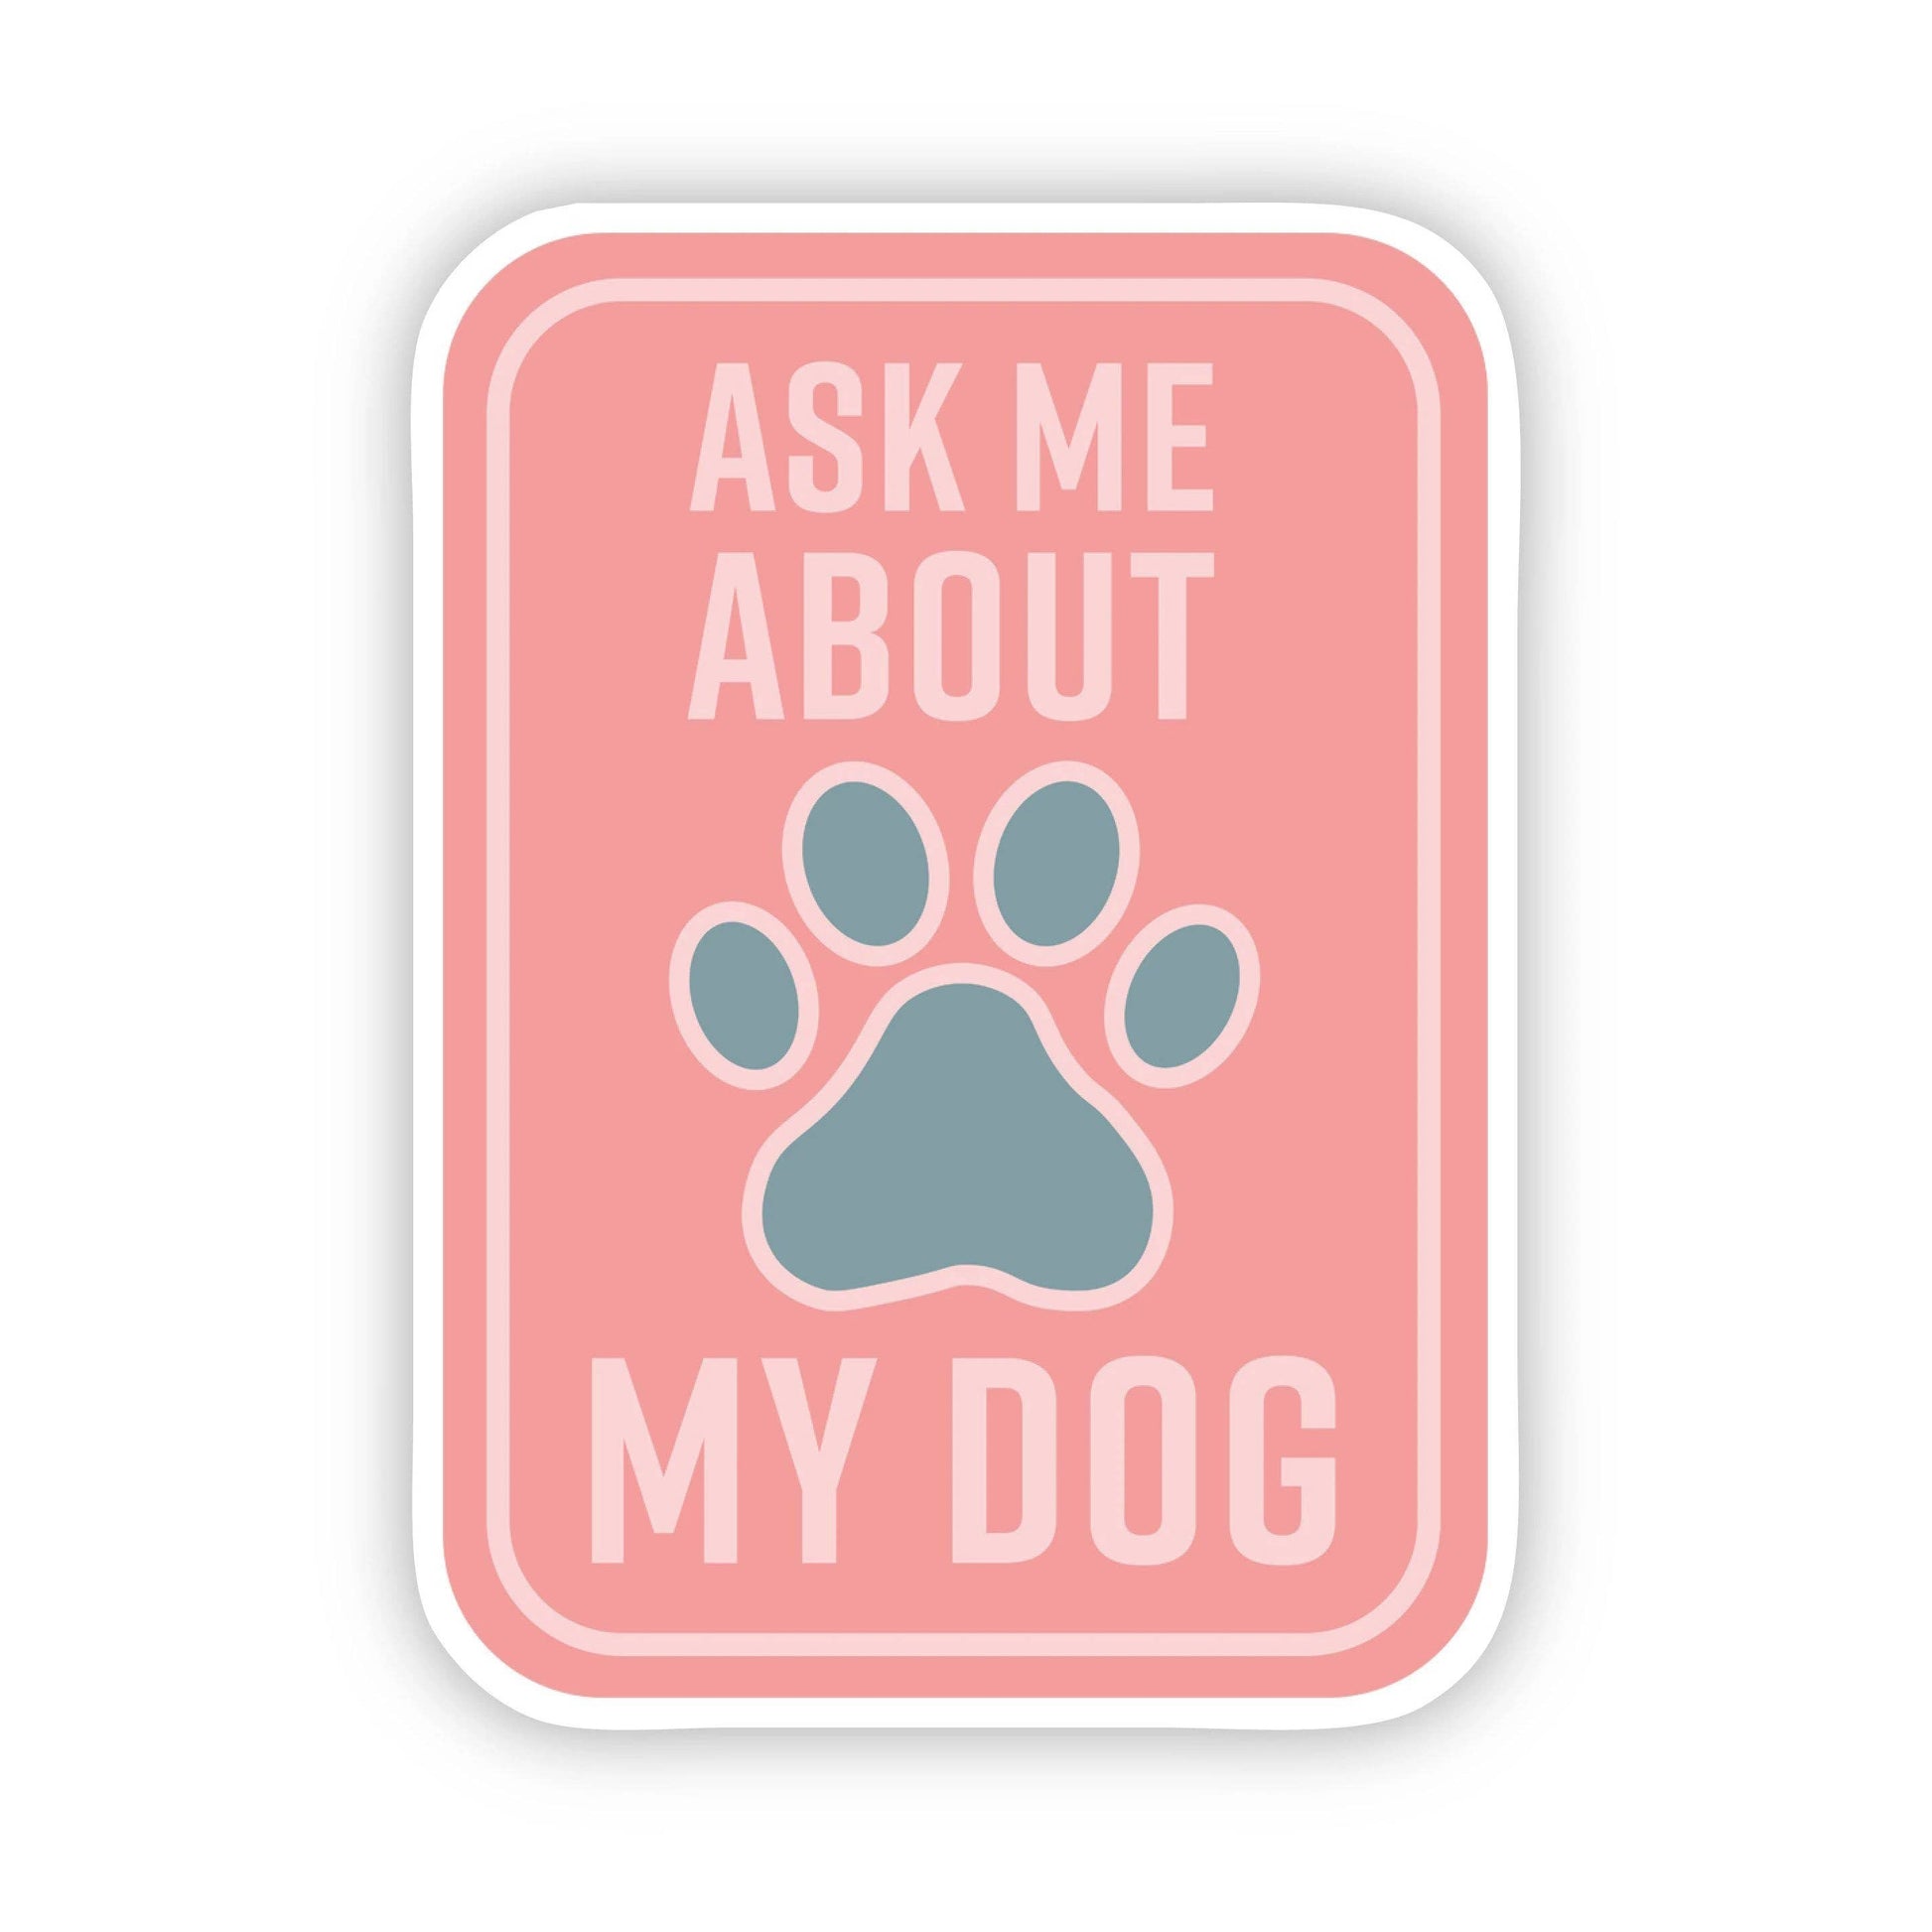 Ask me about my dog sticker by Big Moods